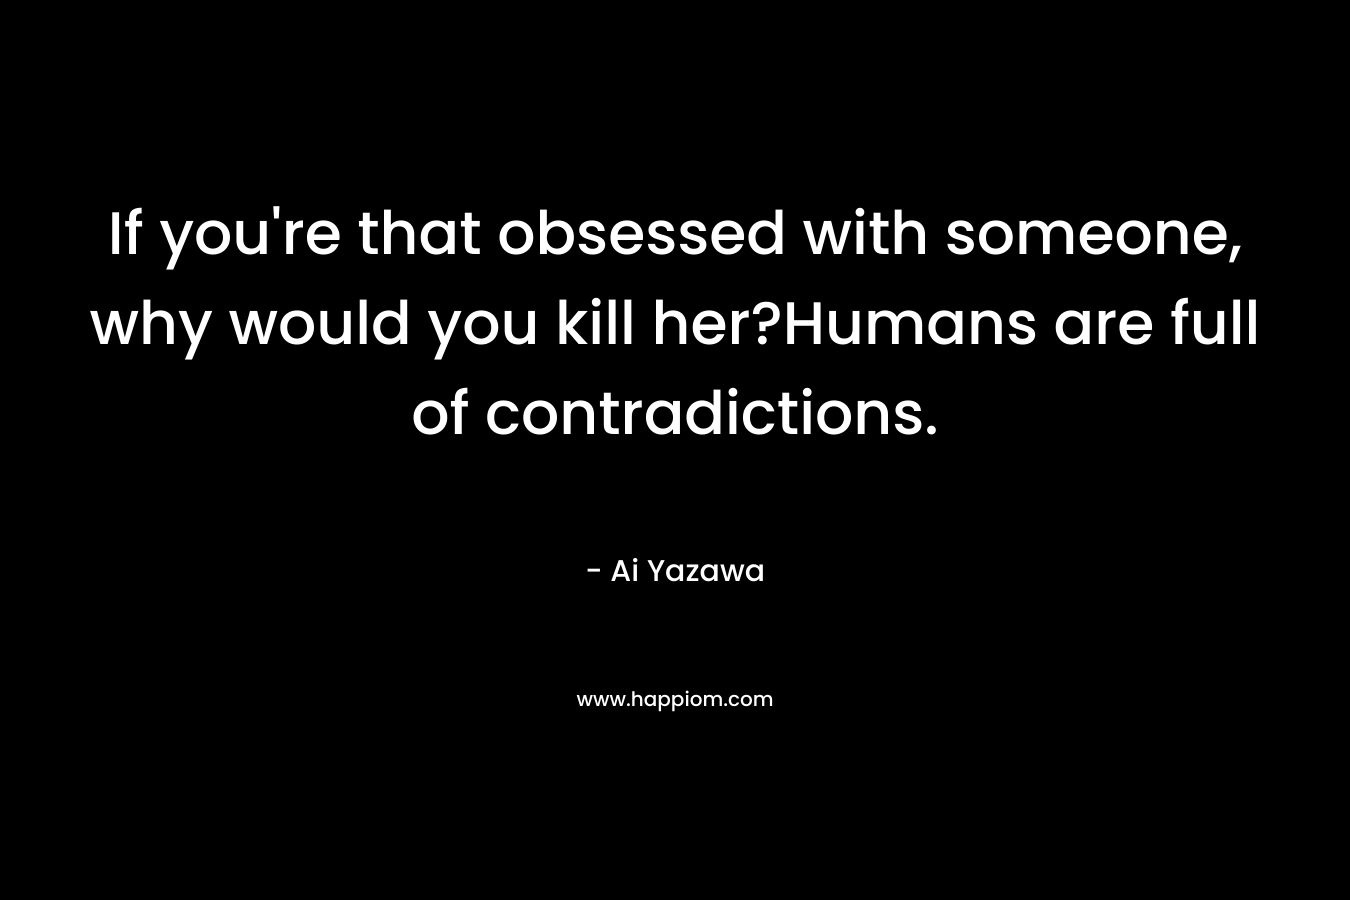 If you're that obsessed with someone, why would you kill her?Humans are full of contradictions.